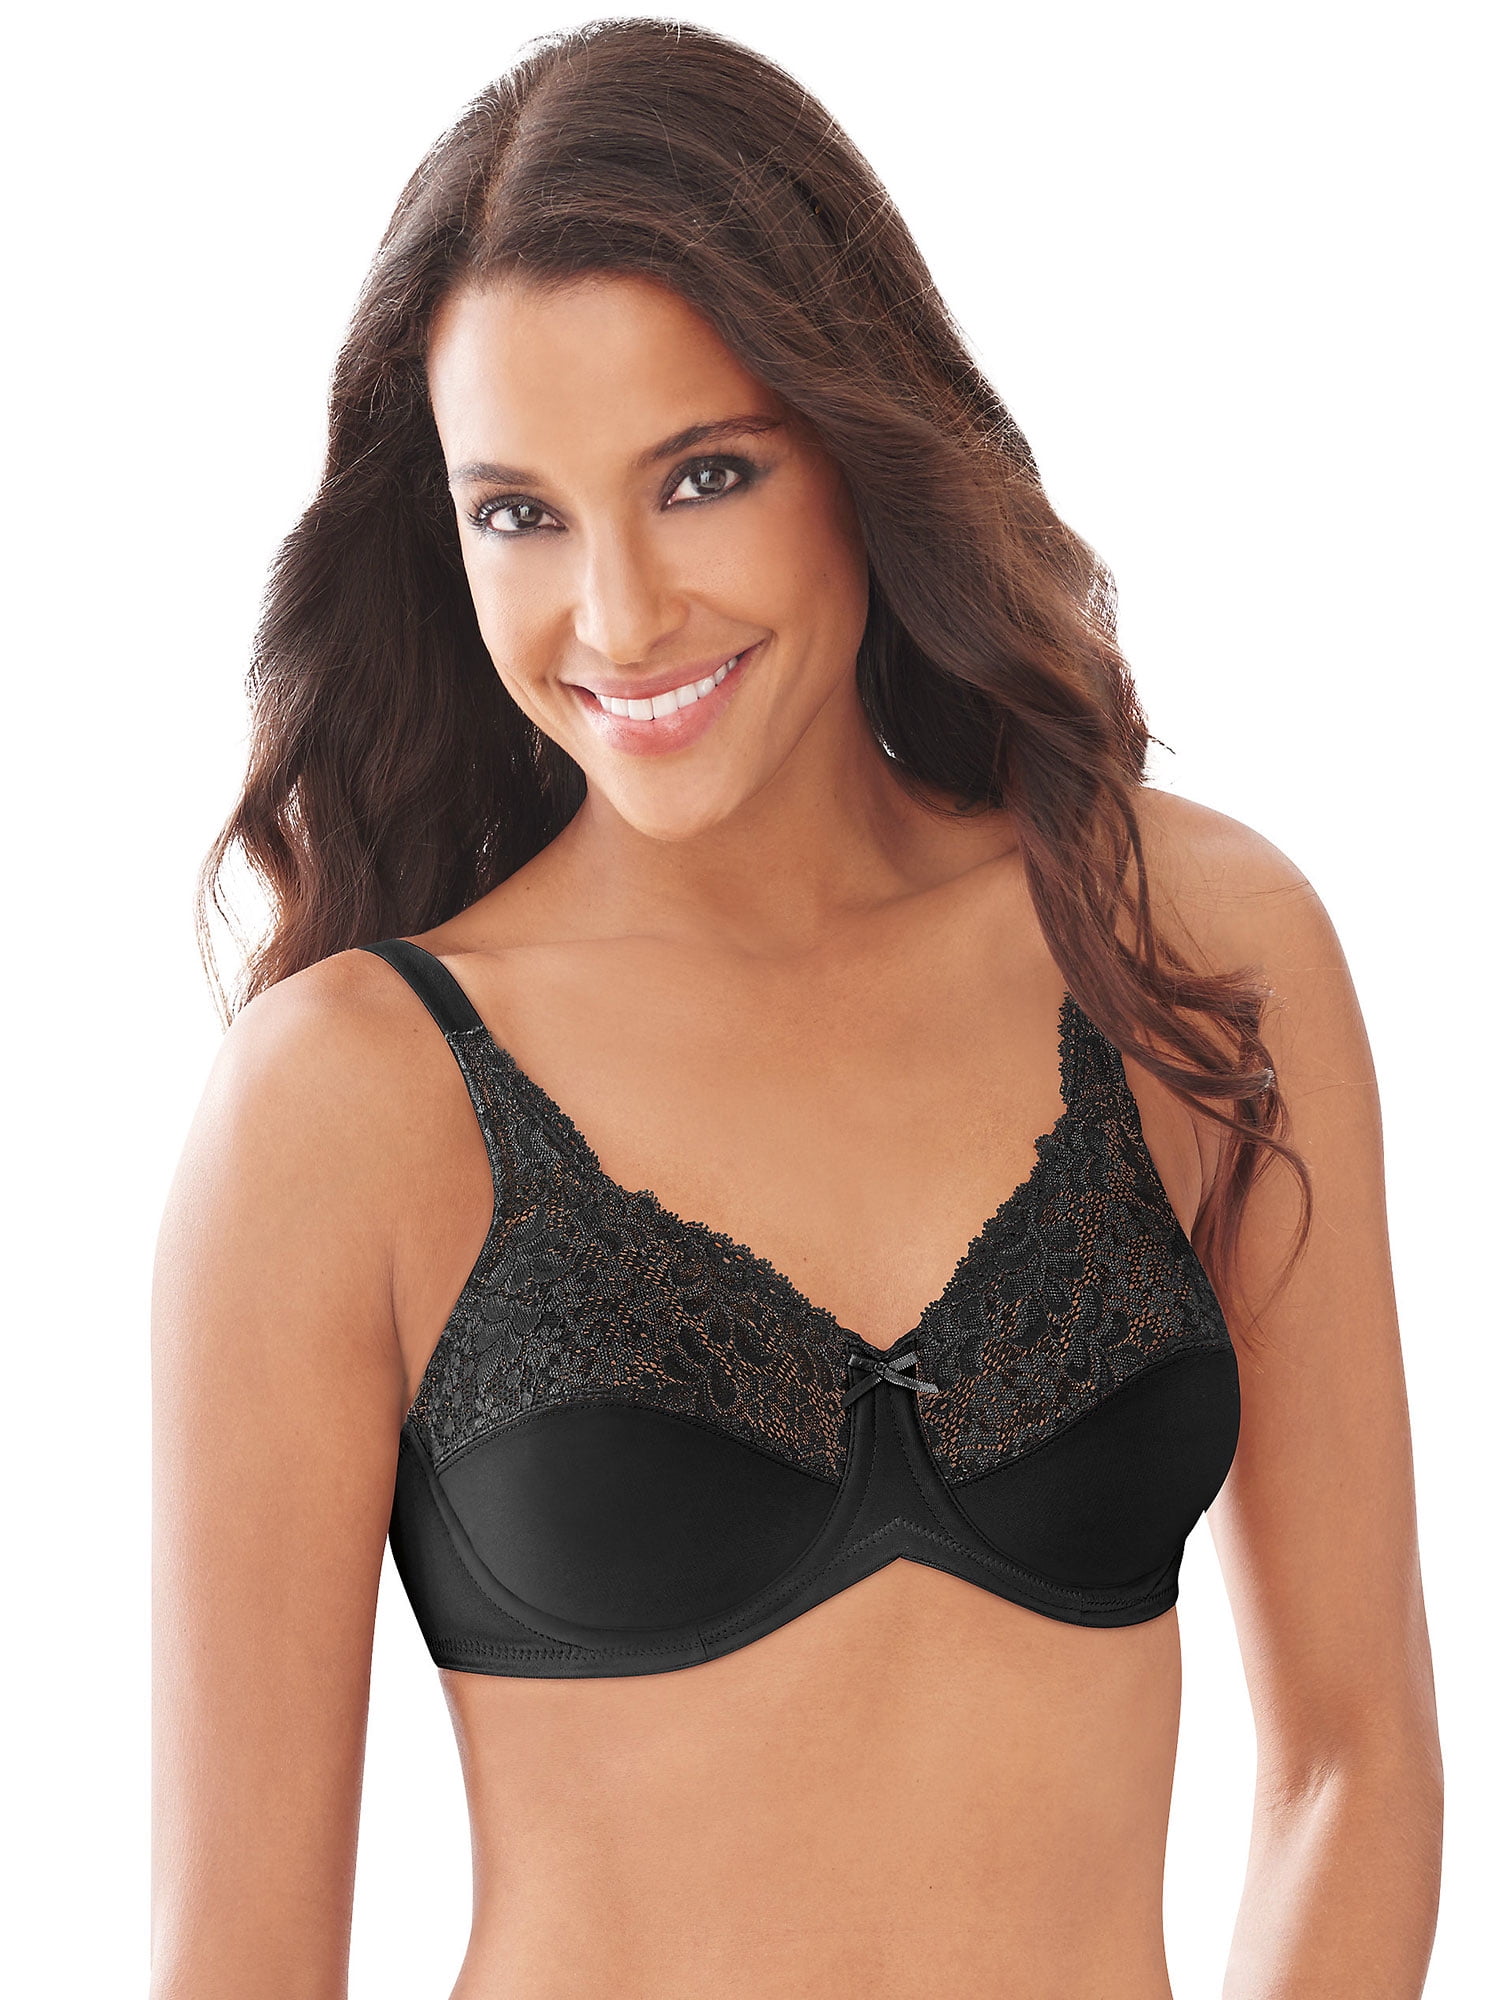 Bali Tailored Women`s Minimizer Bra with Lace Trim - Best-Seller, 4 